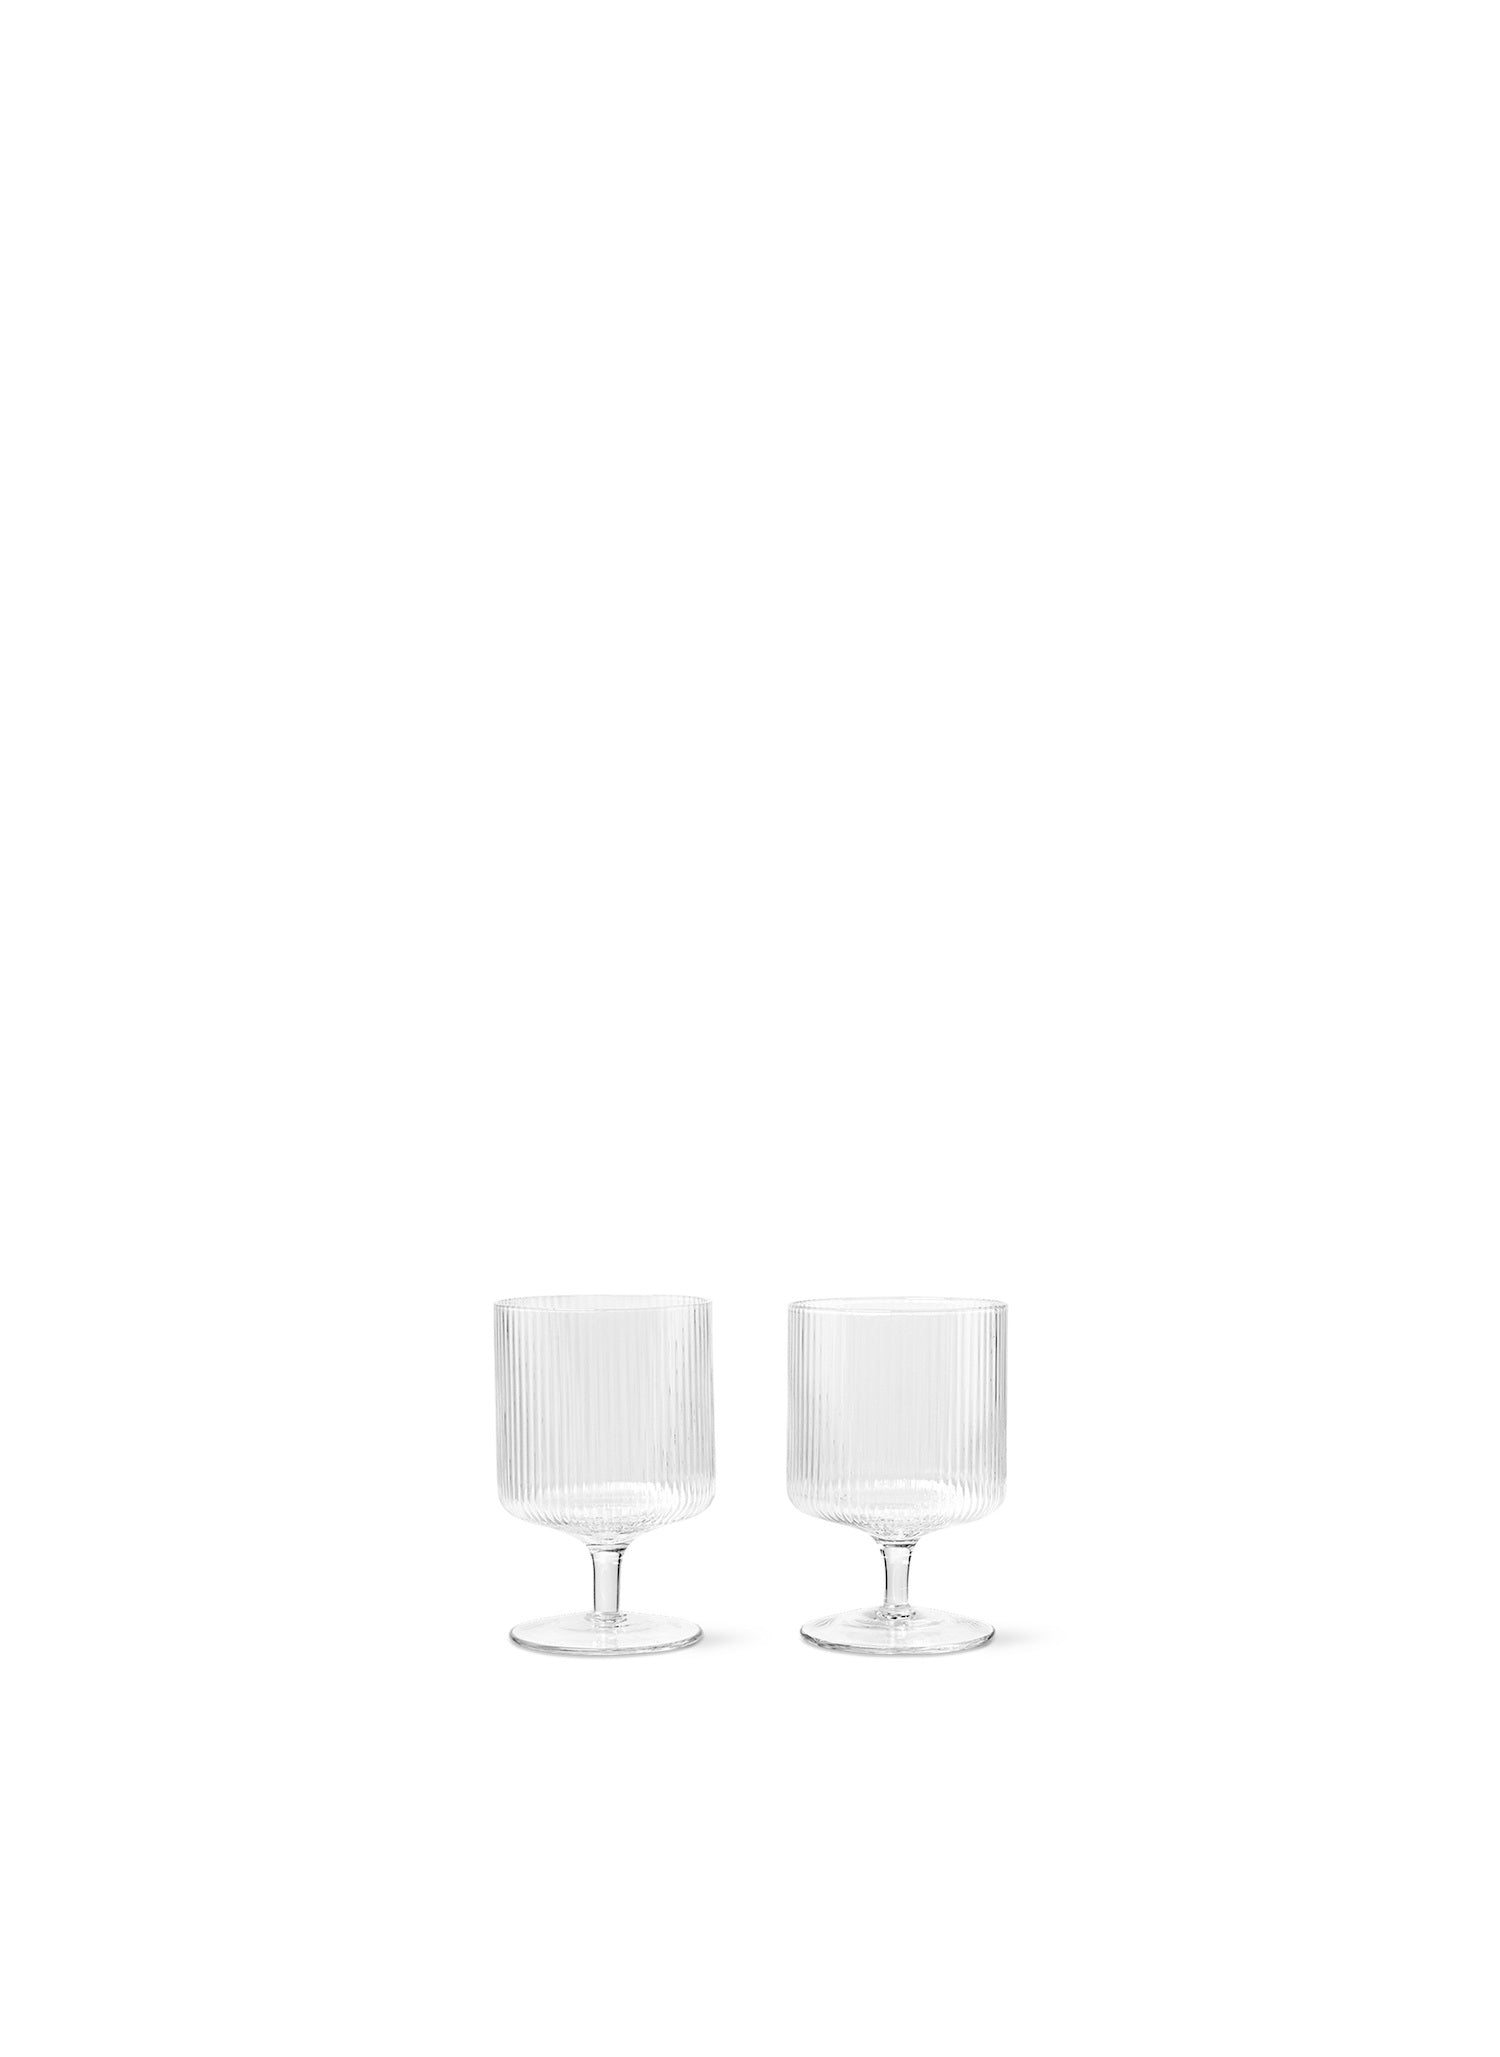 Mouth-blown wine glasses featuring a rippled surface and geometric silhouette, making the set of two glasses stackable.